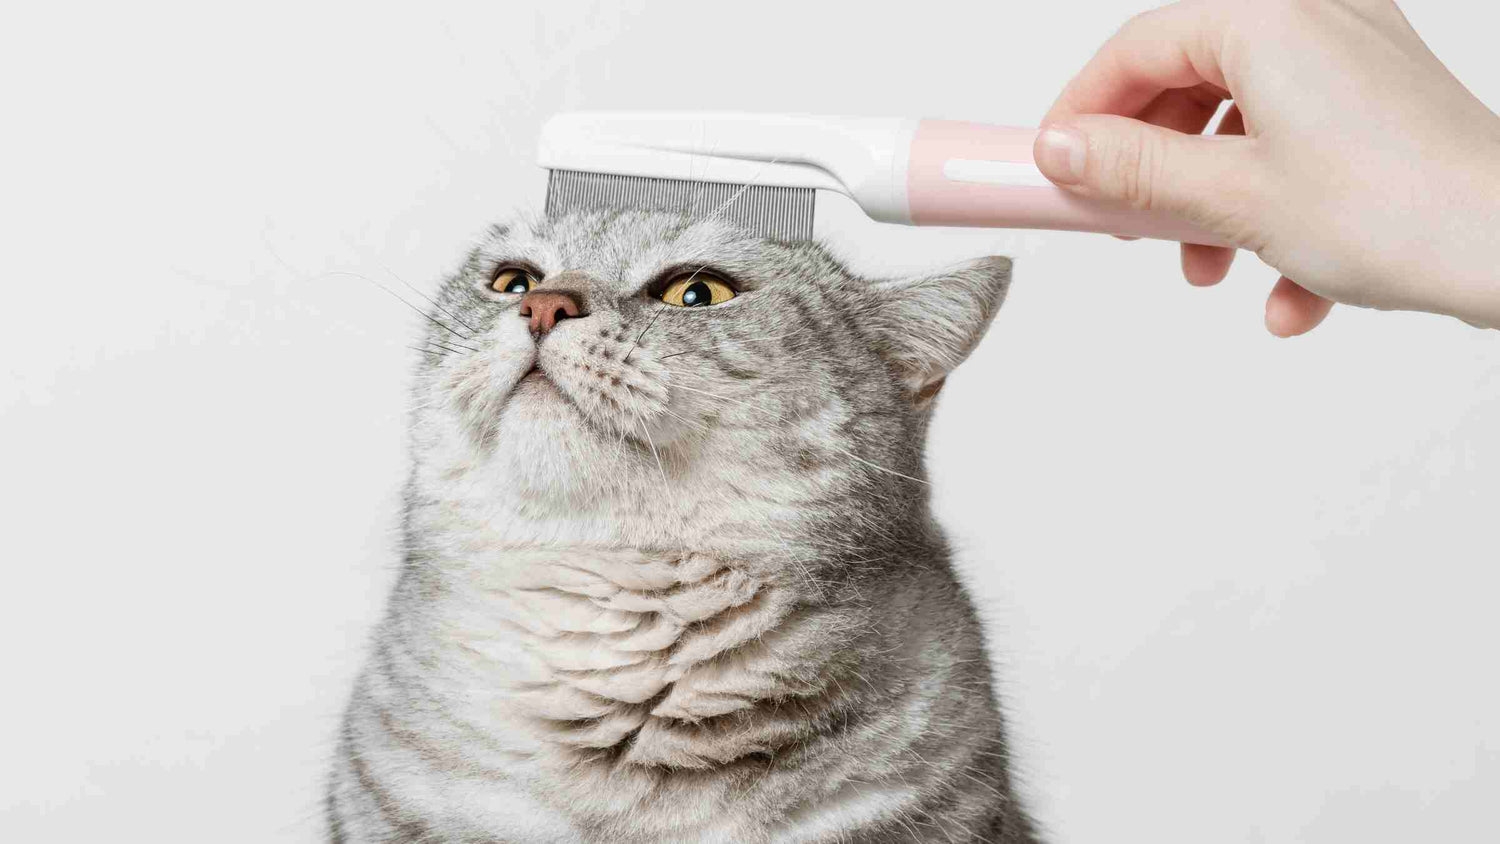 Close-up of a grey cat being groomed with a white comb, focusing on cat grooming care.